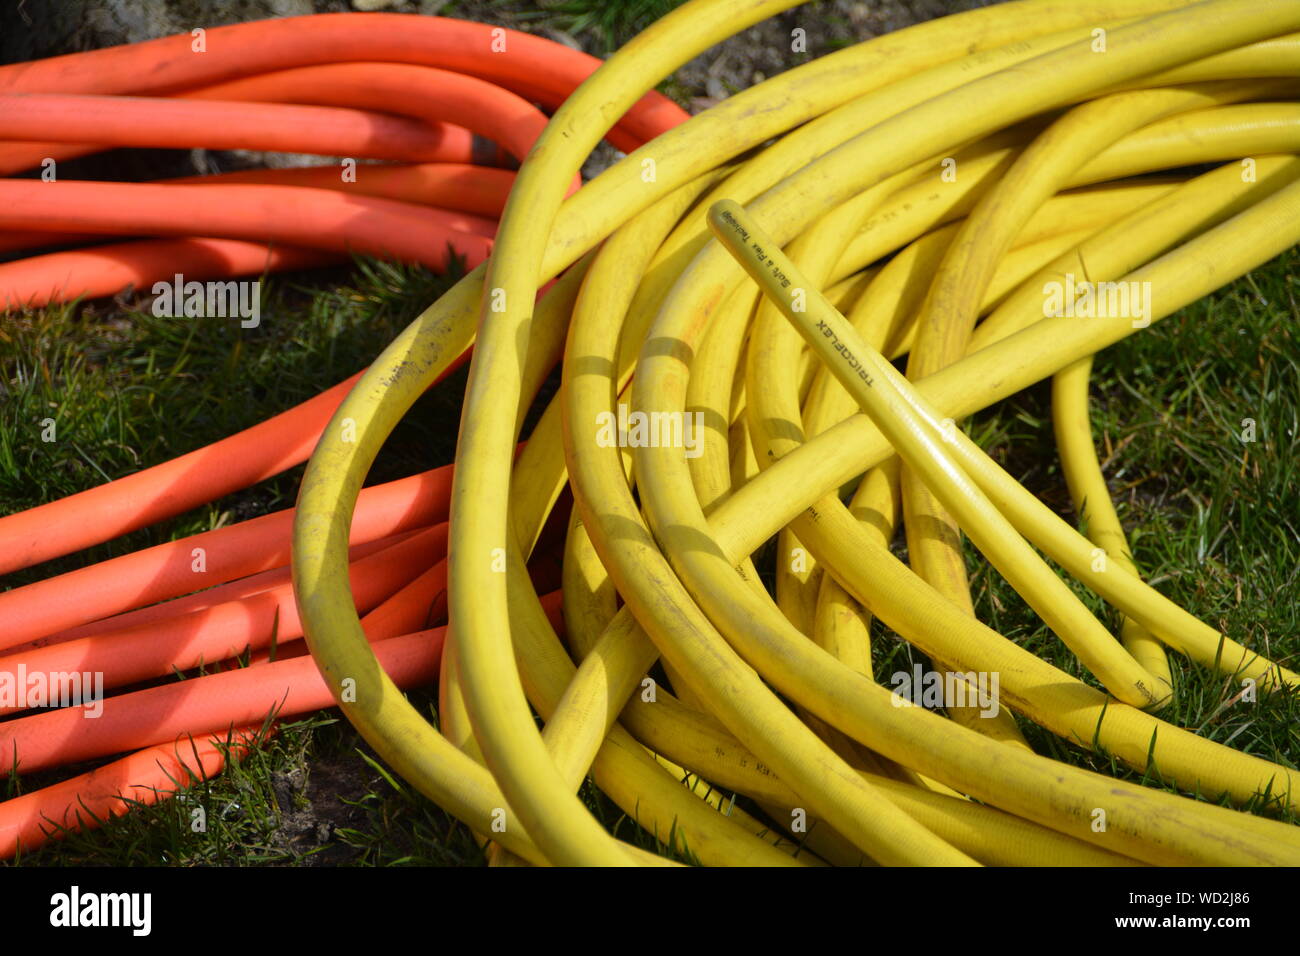 High Angle View Of Garden Hoses On Grassy Field Stock Photo